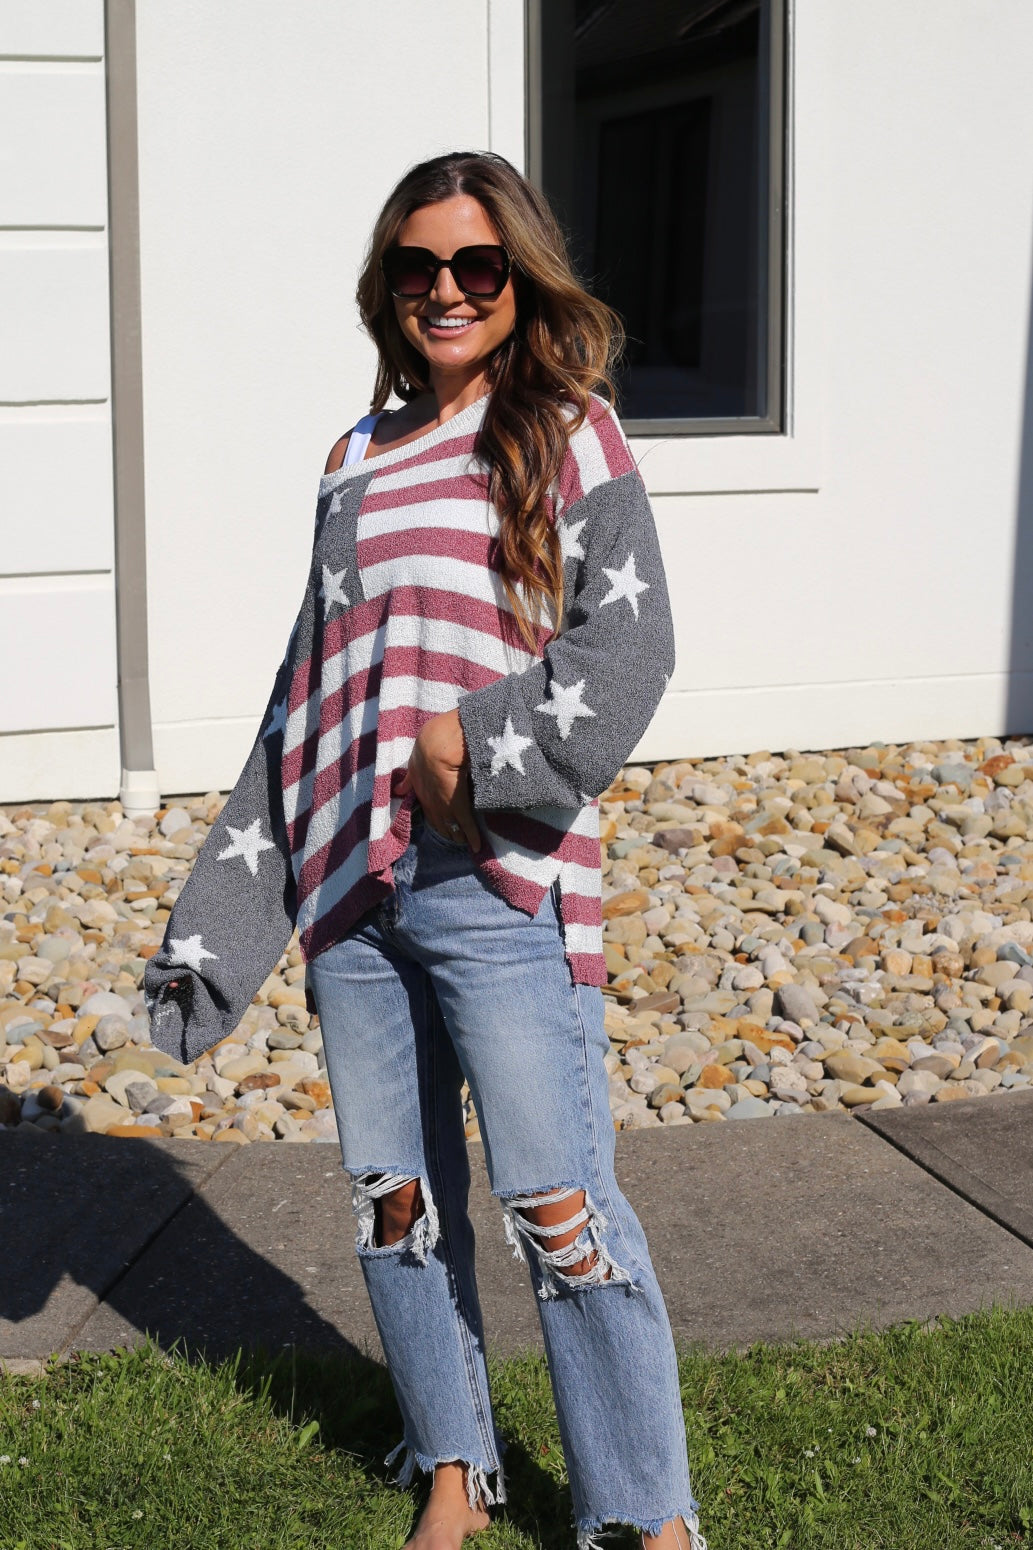 Flag Knit Sweater